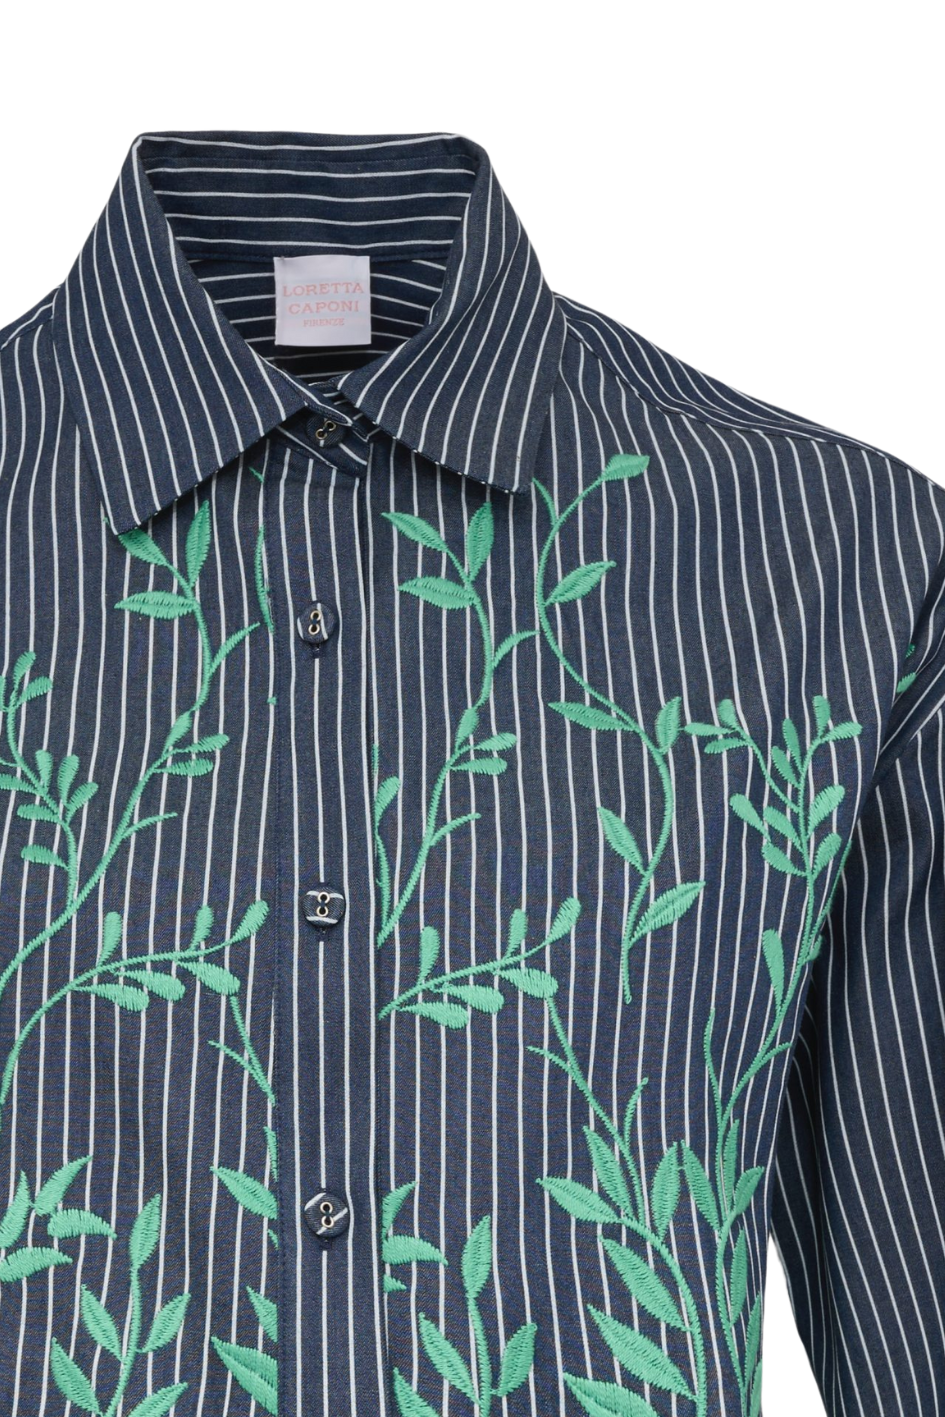 Shirt with Embroidered Details Mint Denim Leaves